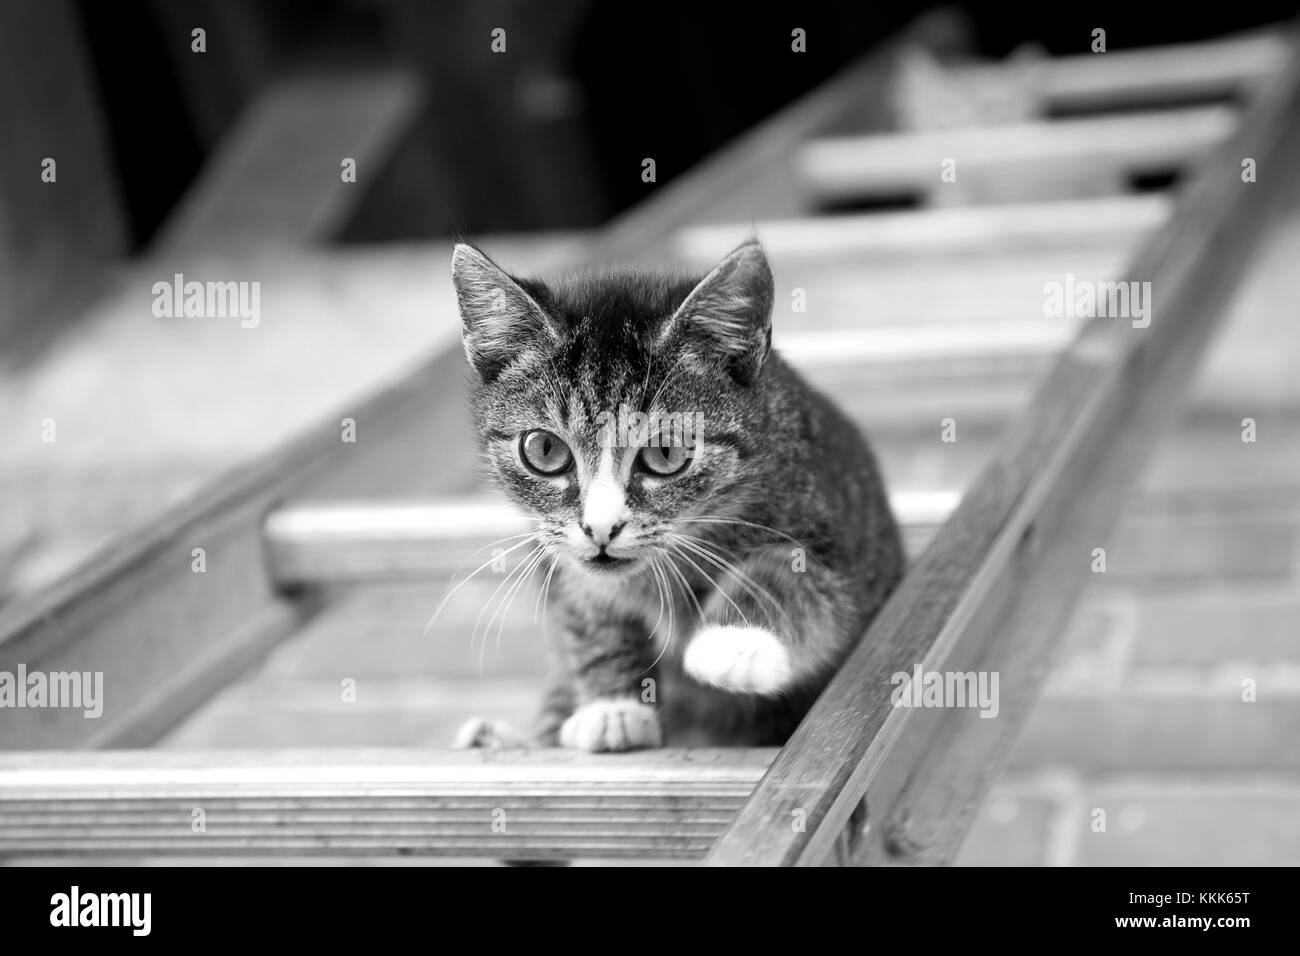 young cat climbing on a ladder Stock Photo